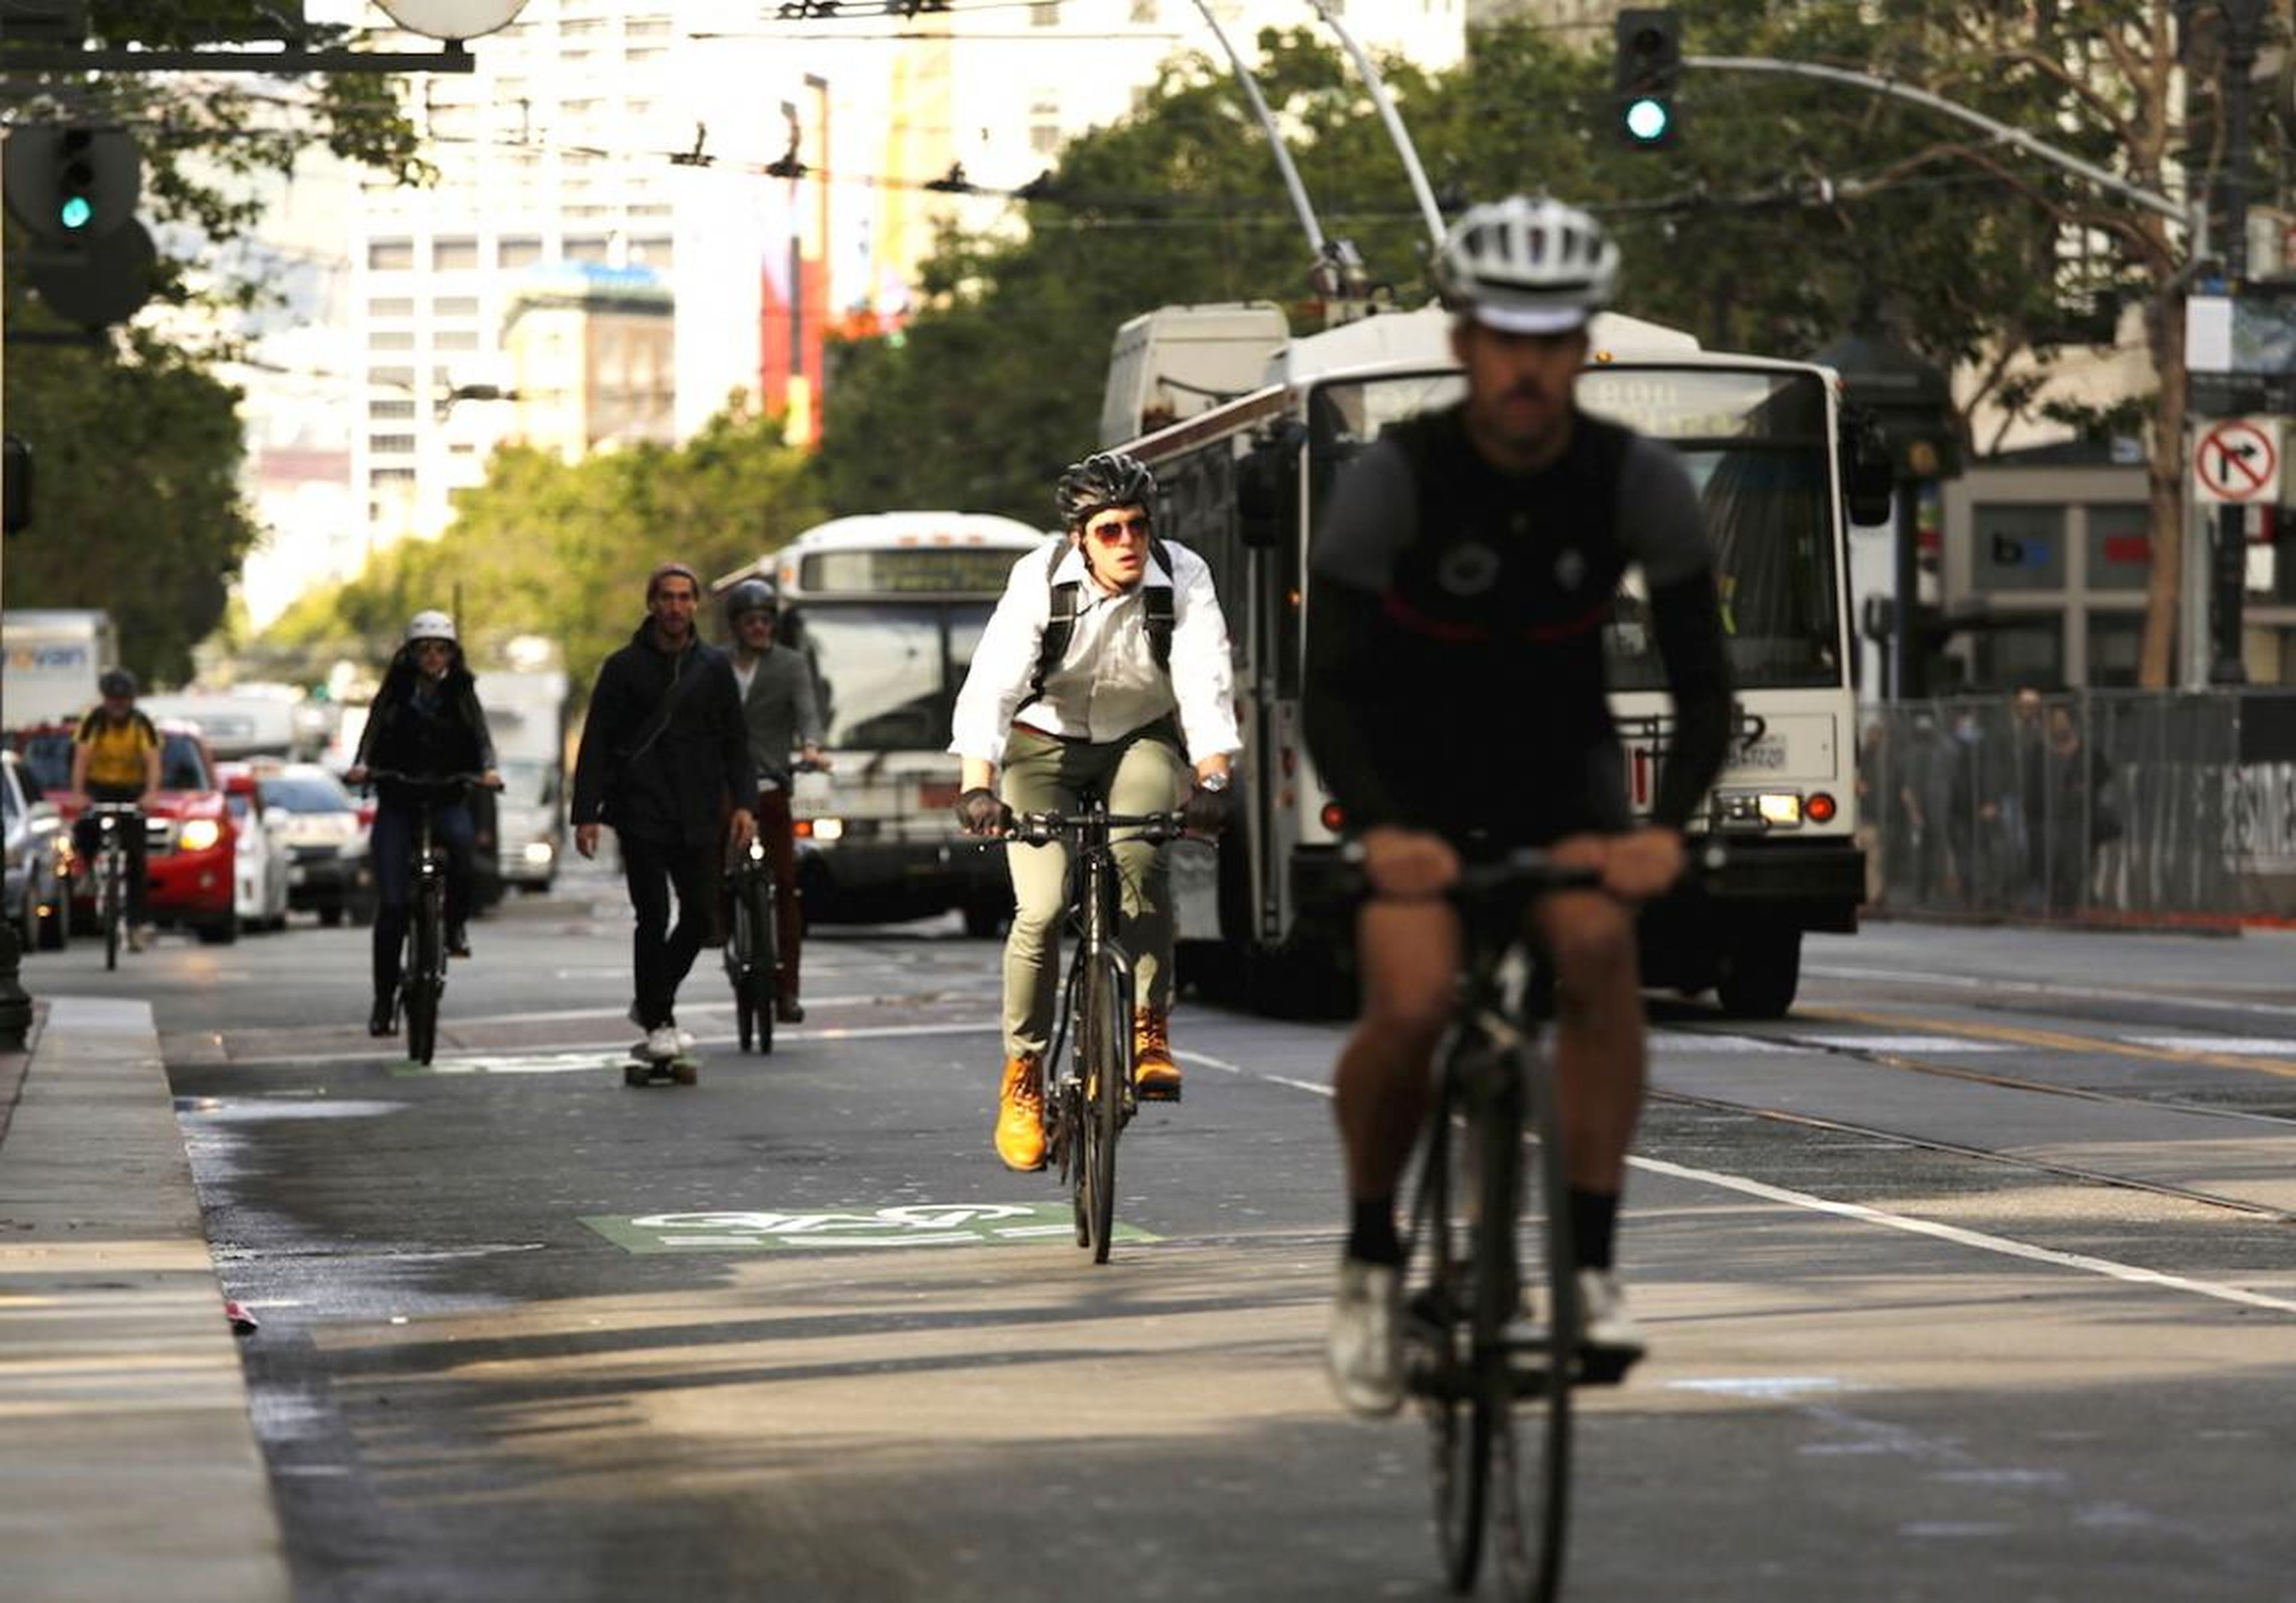 San Francisco wants to ban cars on one of its busiest streets.